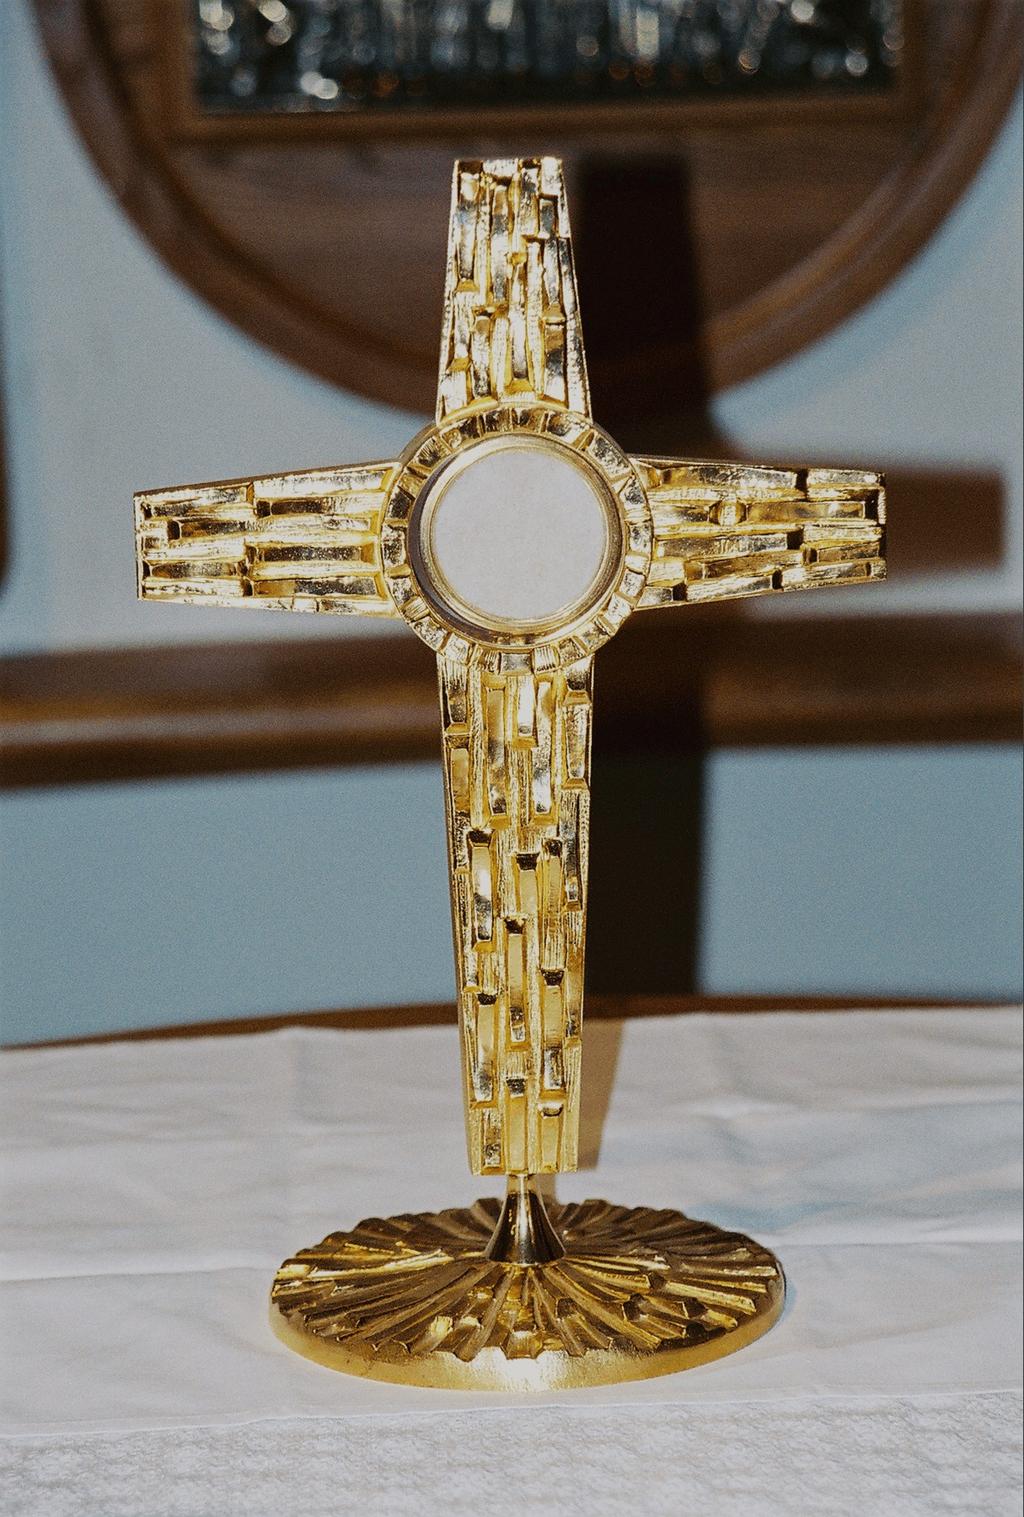 CtR's 2008 Strategic Pastoral Plan January 29, 2008 PERPETUAL EUCHARISTIC ADORATION Lo, I am with you